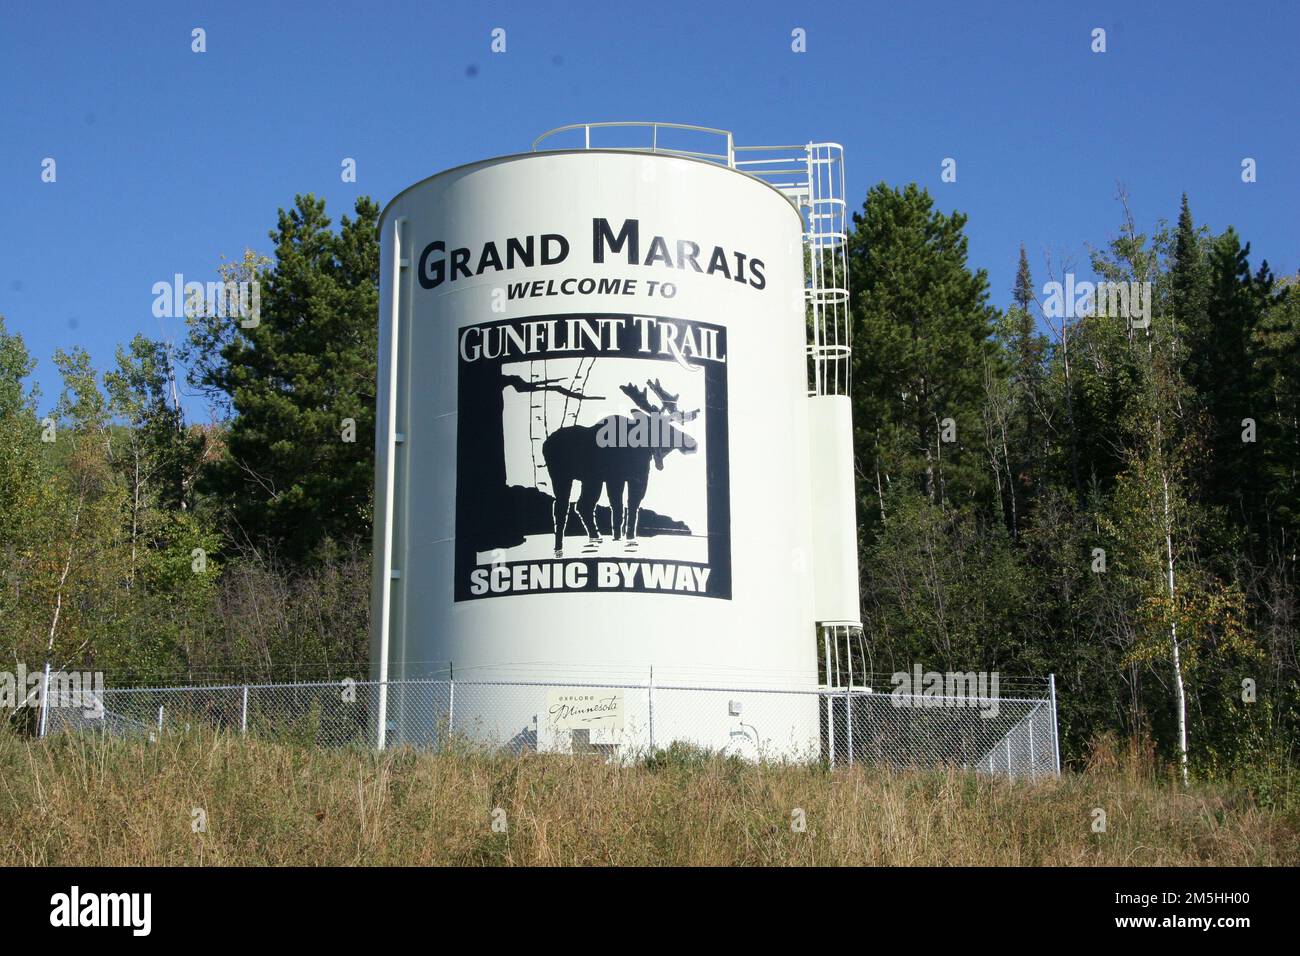 Gunflint Trail Scenic Byway - Gunflint Trail Scenic Byway Water Tower. The water tower is painted to welcome travelers to the Gunflint Trail Scenic Byway. The Scenic Byway logo pictures a moose standing on a lakeshore. Minnesota (47.763° N 90.343° W) Stock Photo